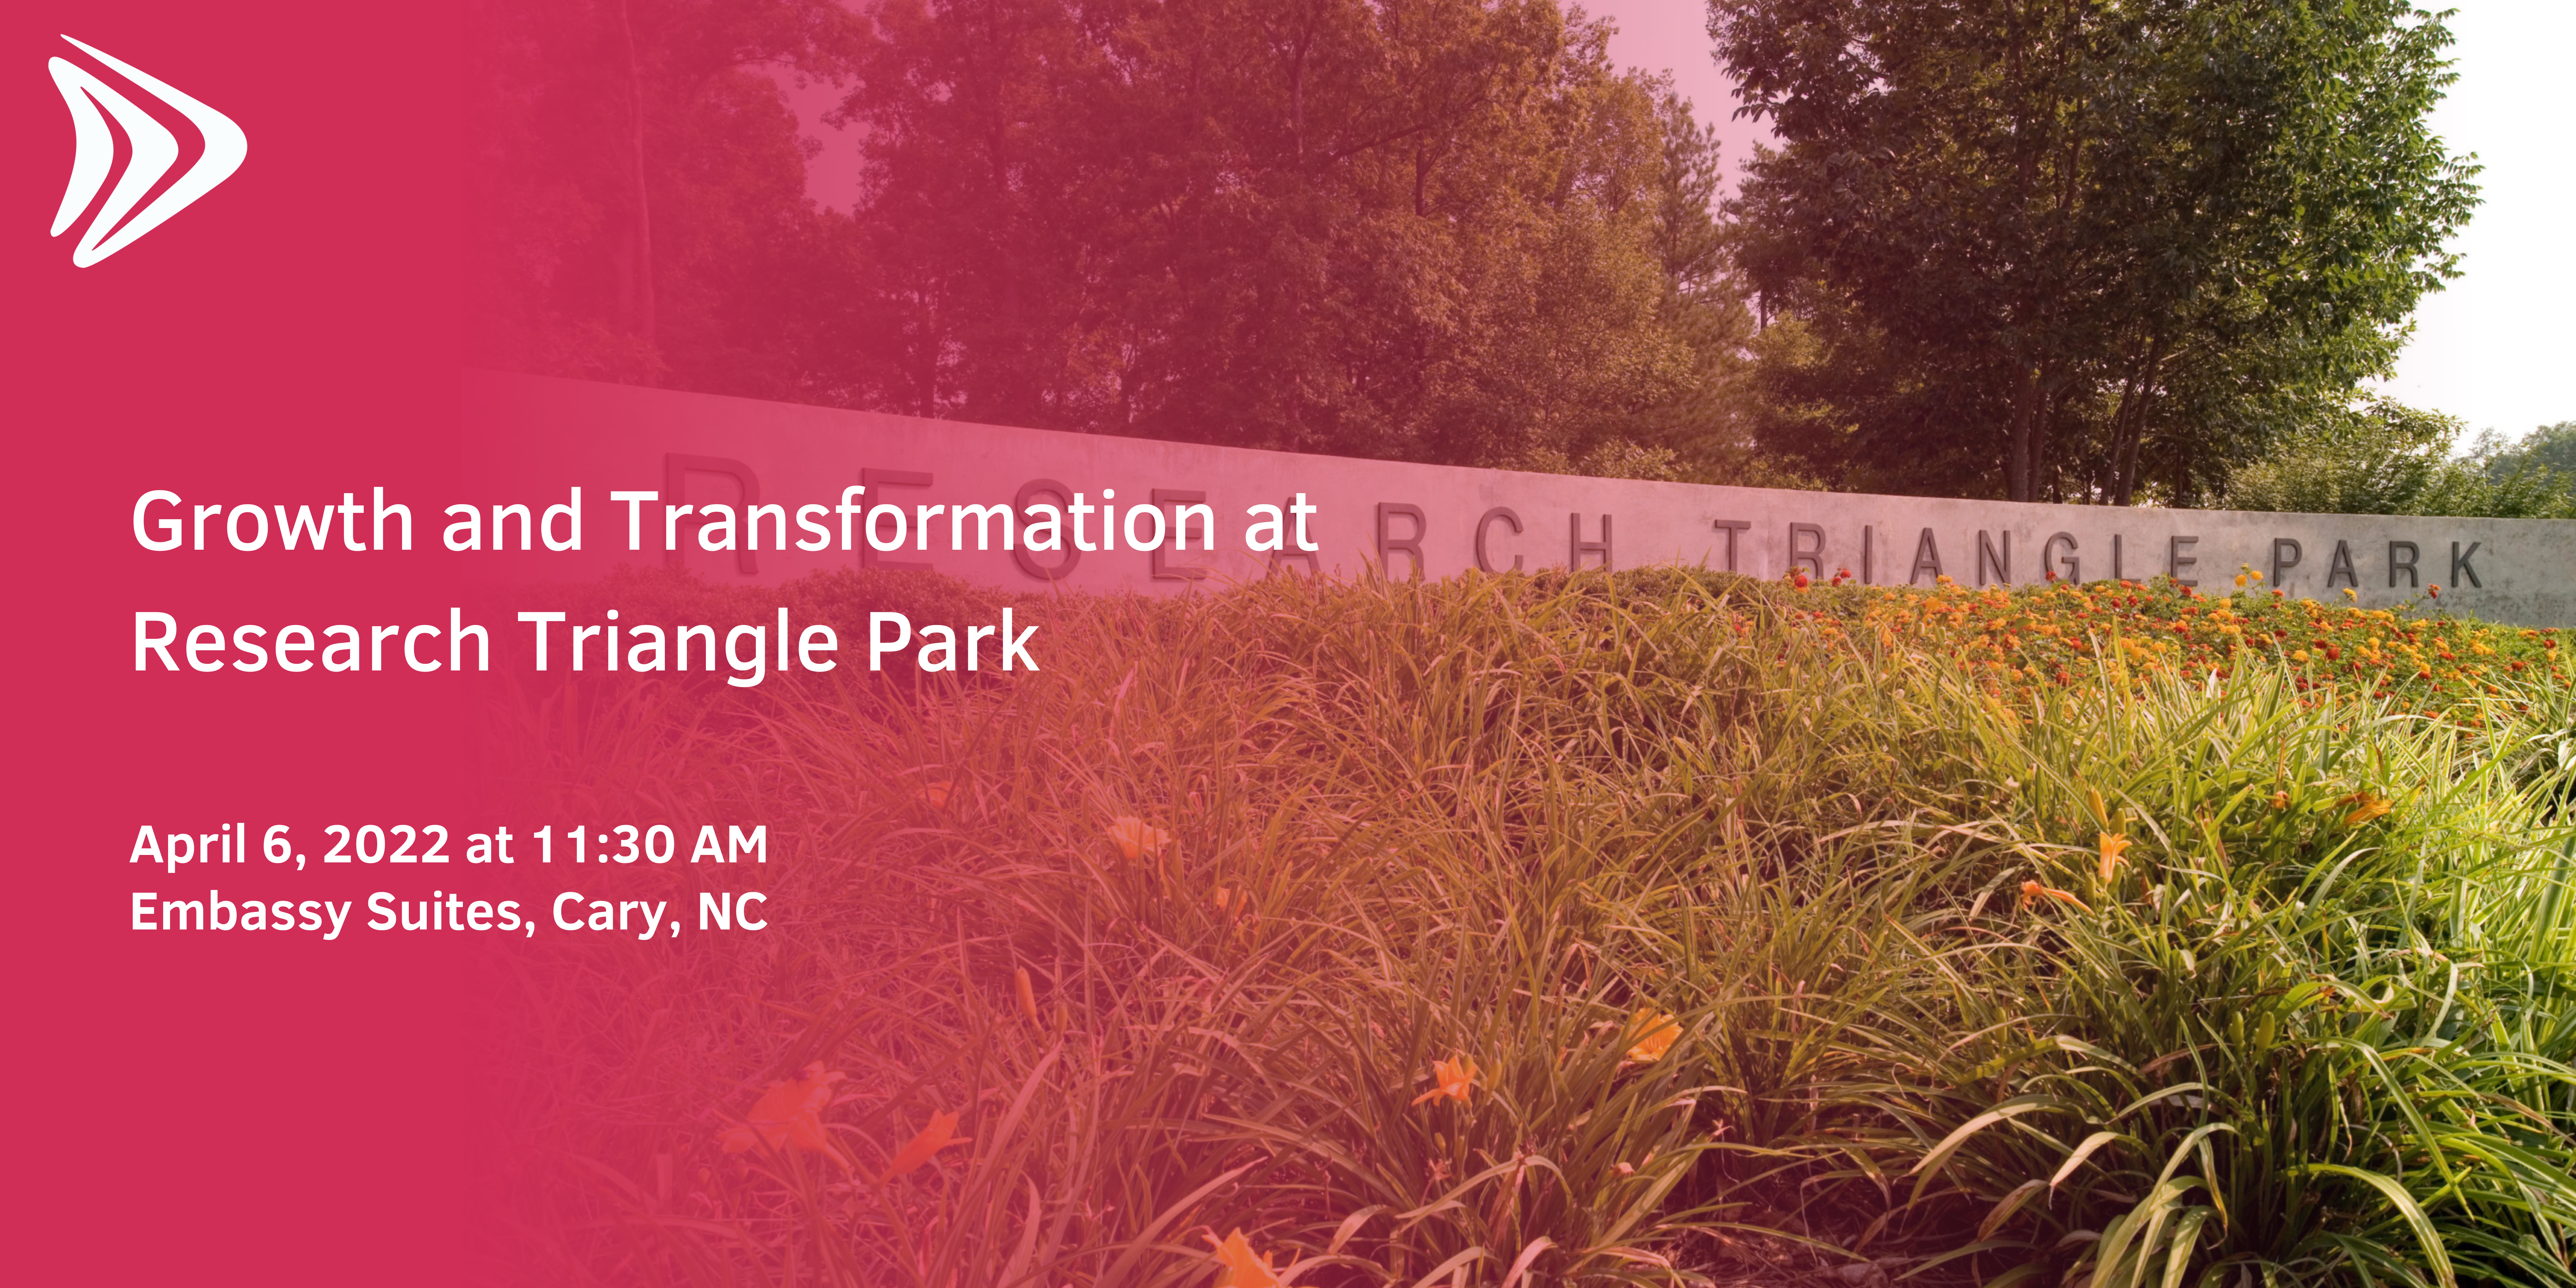 Upcoming Event: Growth and Transformation at Research Triangle Park